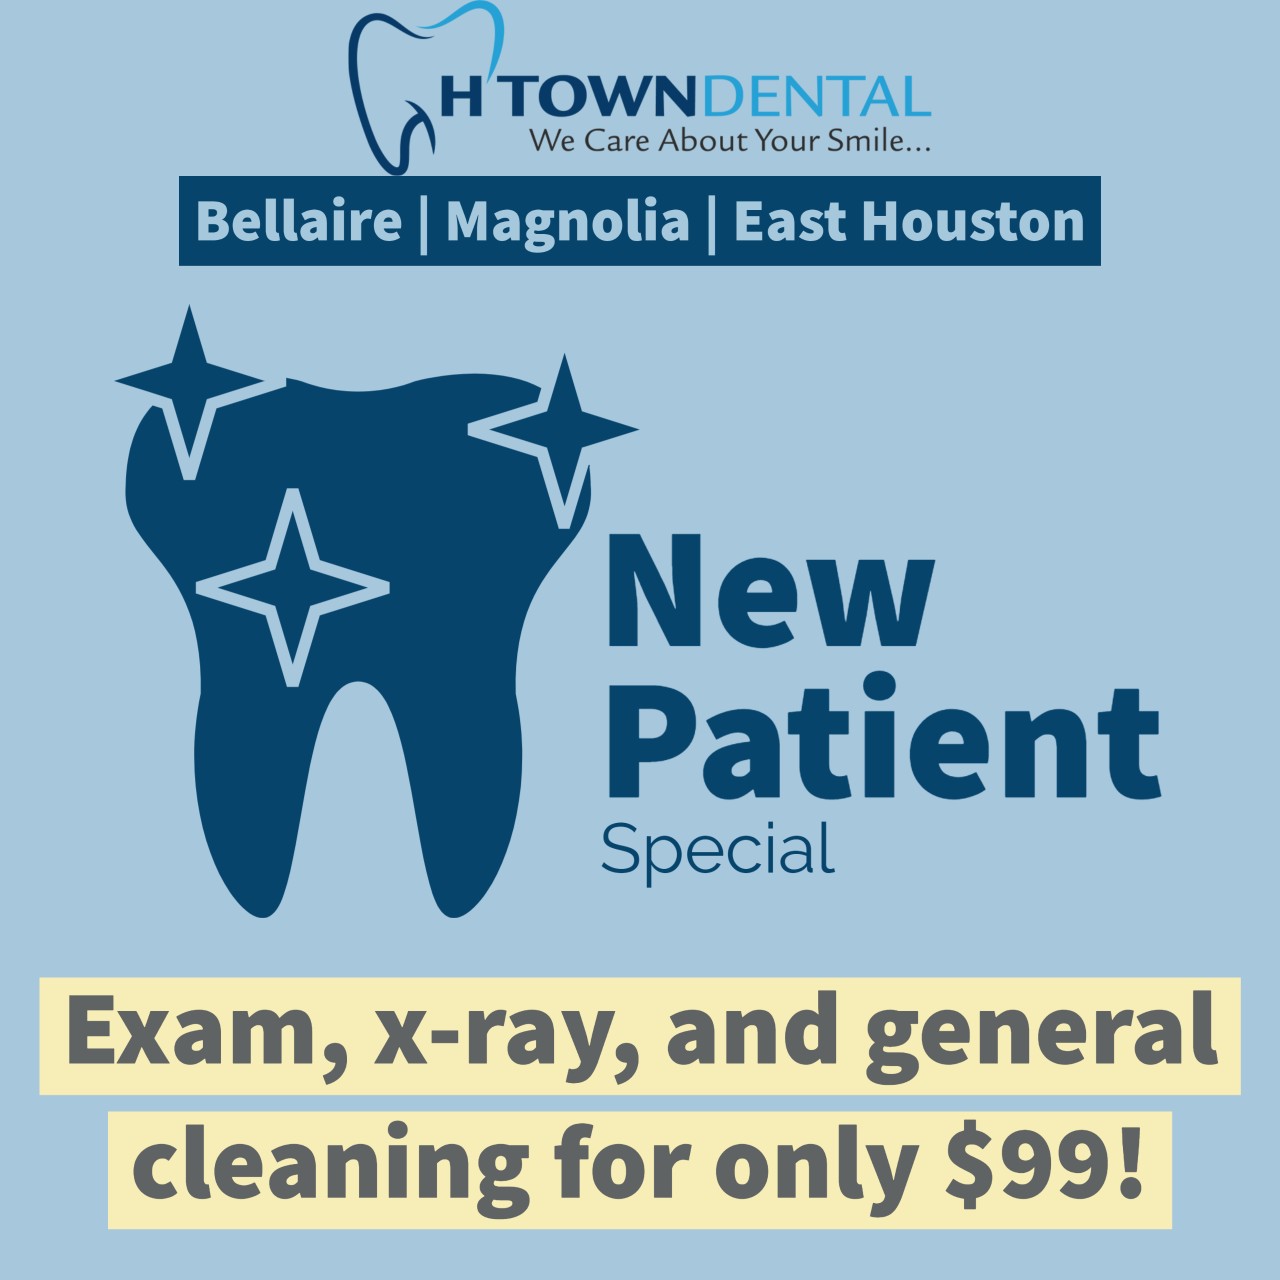 Promotion for new dental patients